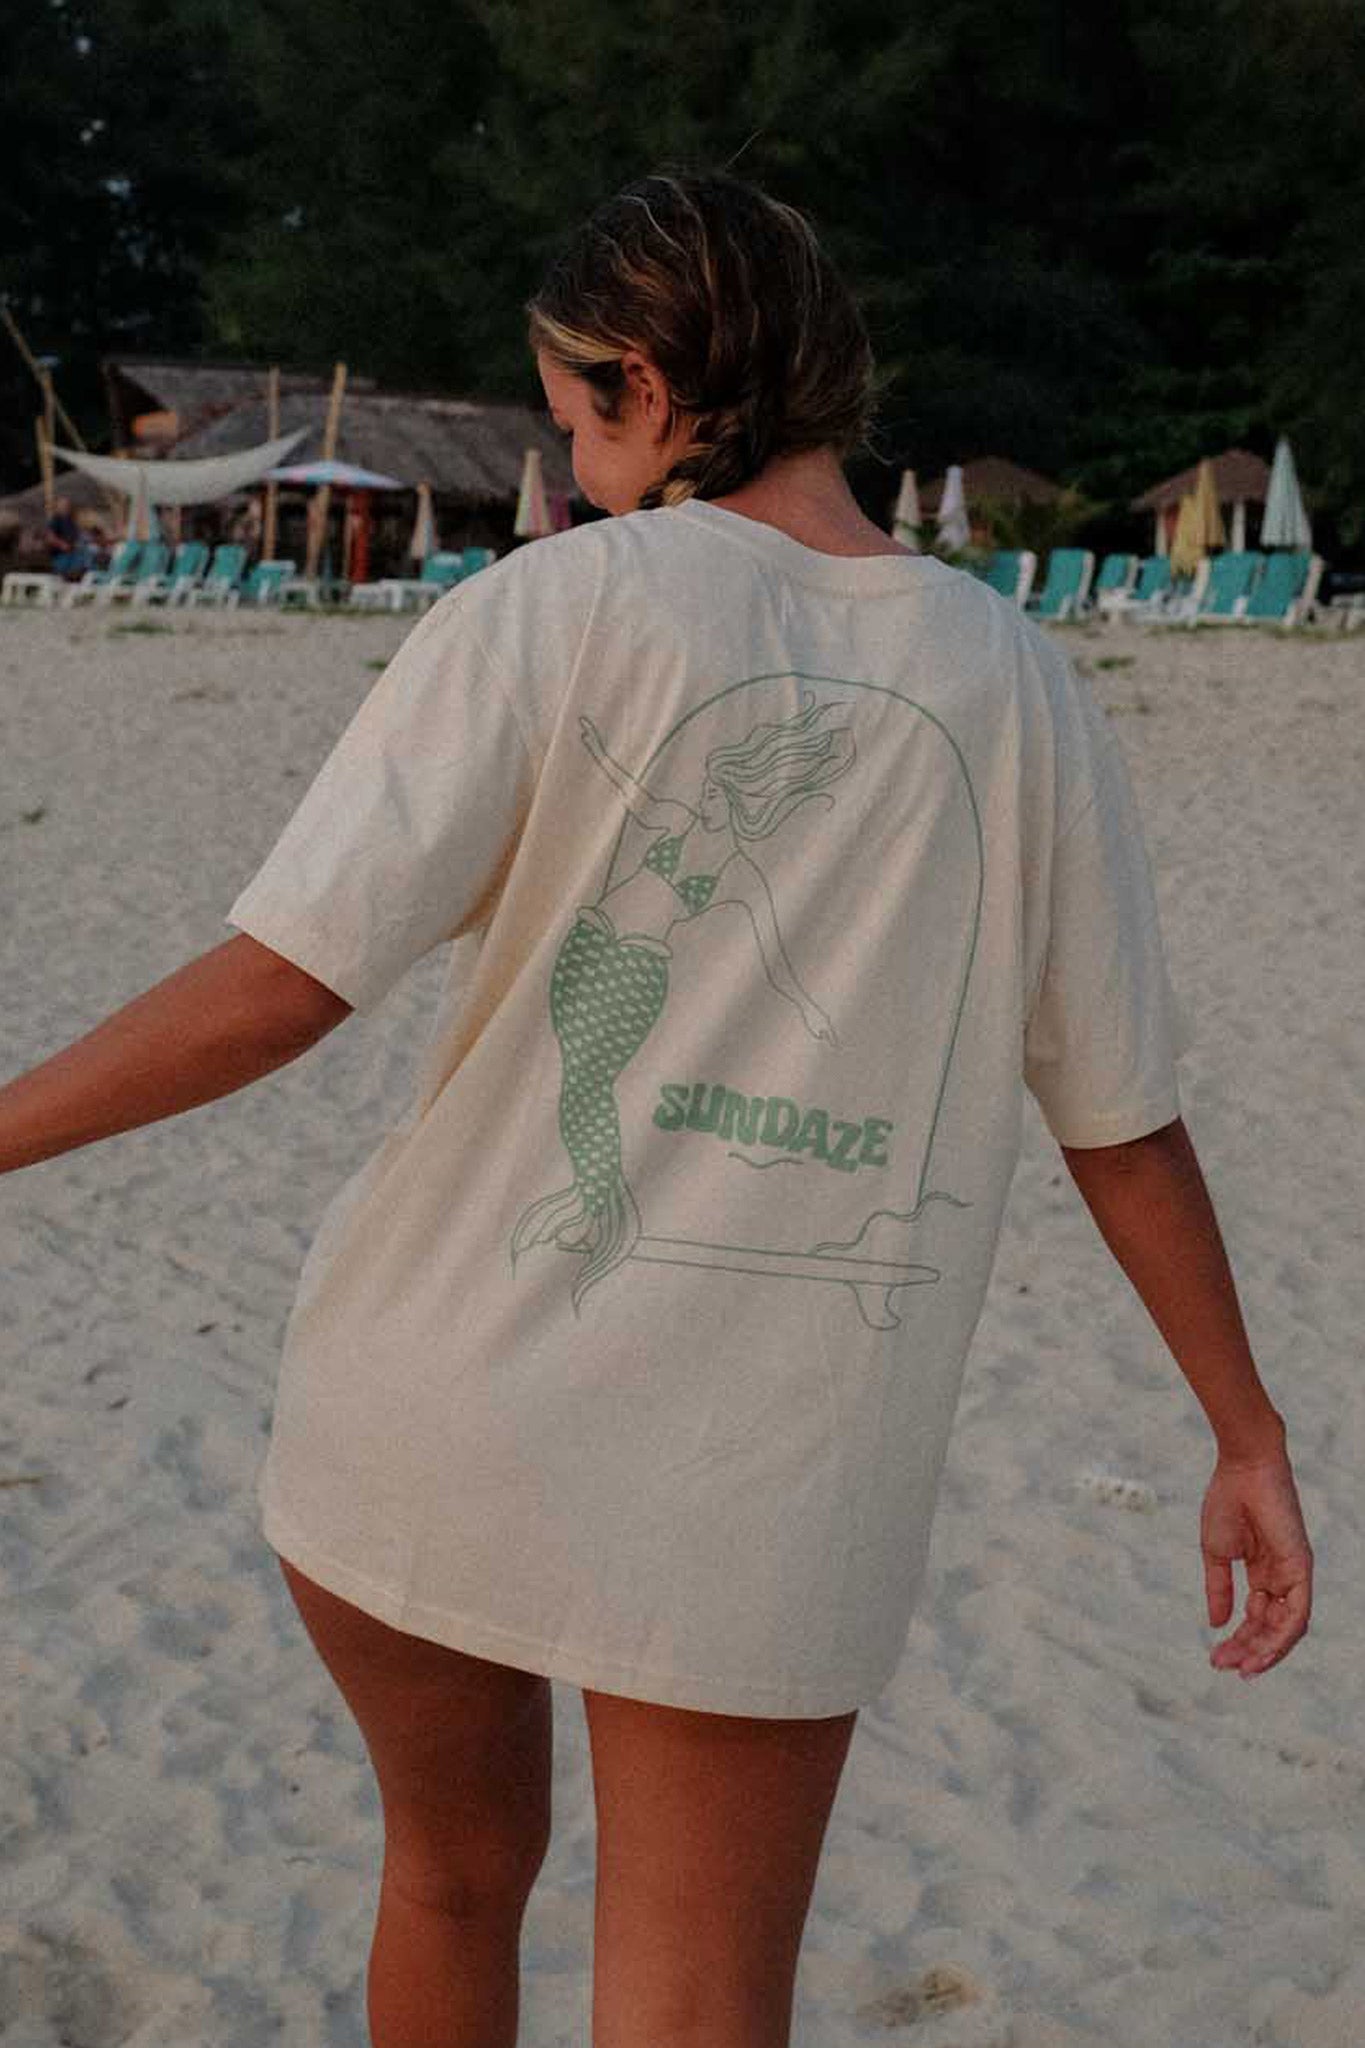 Model posing at the beach from the back, showing her t-shirt with mermaid illustration